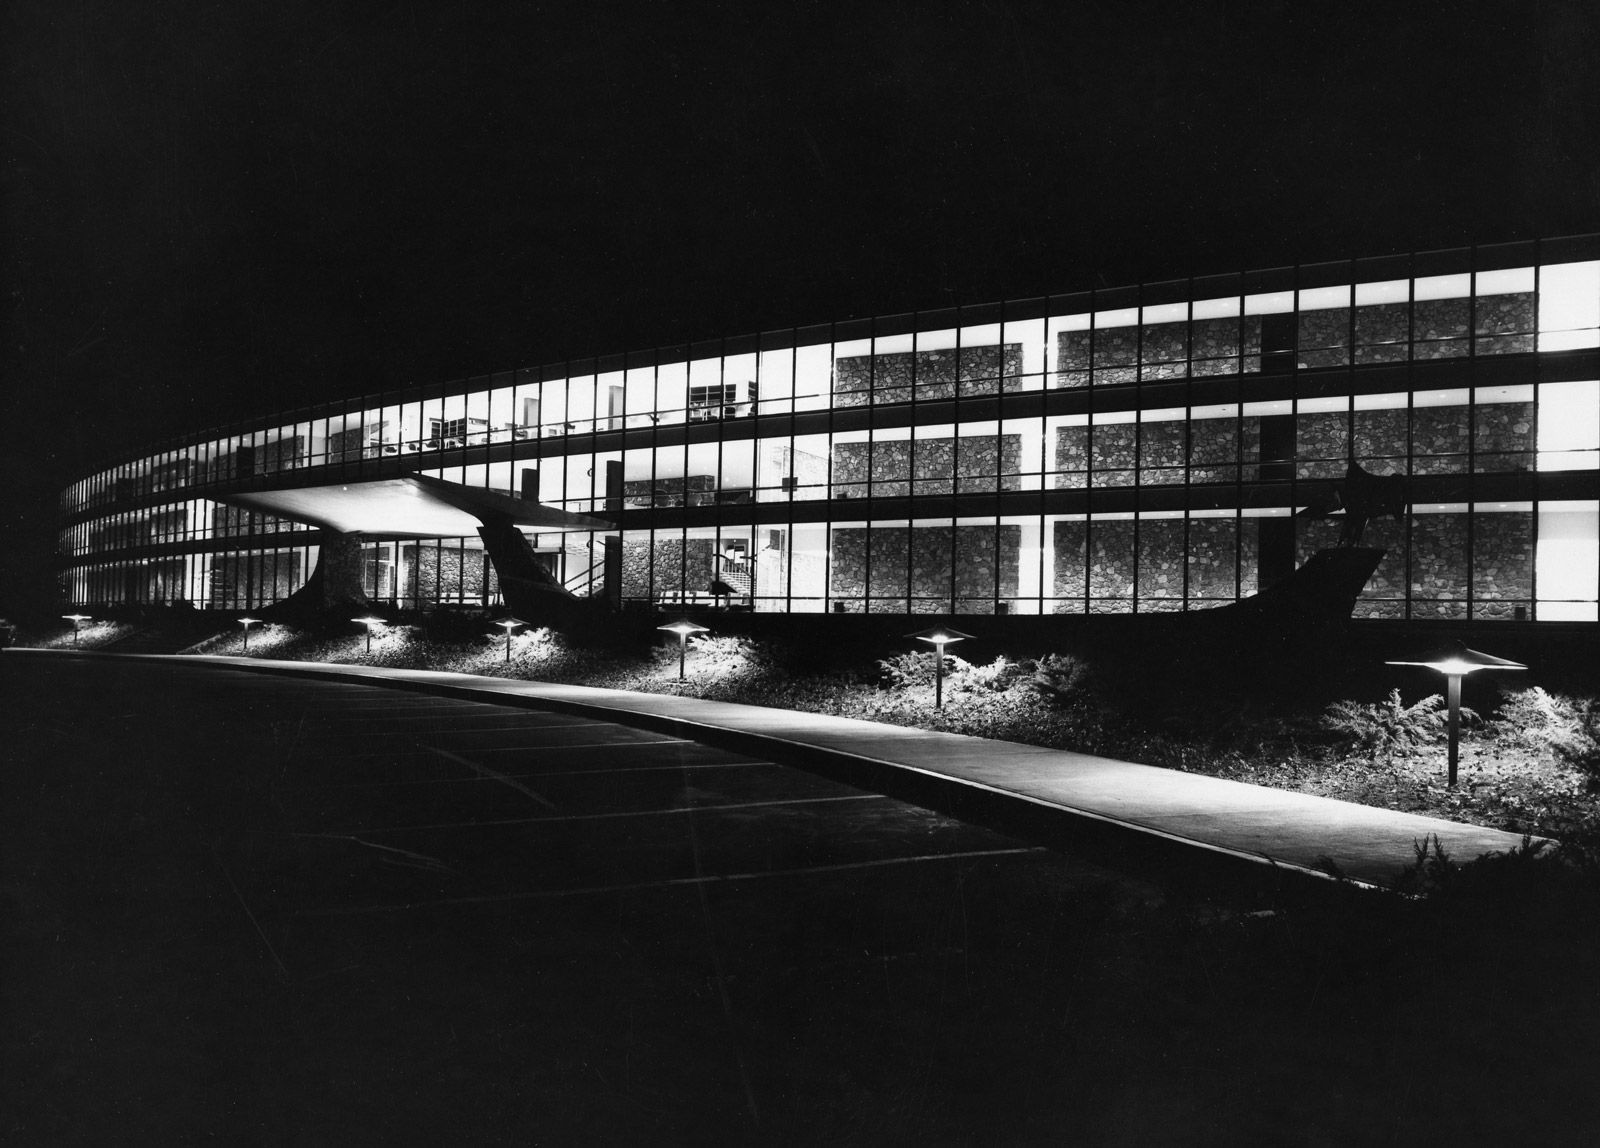 [↑] The IBM Research Center in Yorktown Heights, NY: Eero Saarinen’s design contrasted a spaceship-worthy glass exterior with a warm, organic stone wall inside. This balance of natural and the engineered is the backbone of IBM Plex.